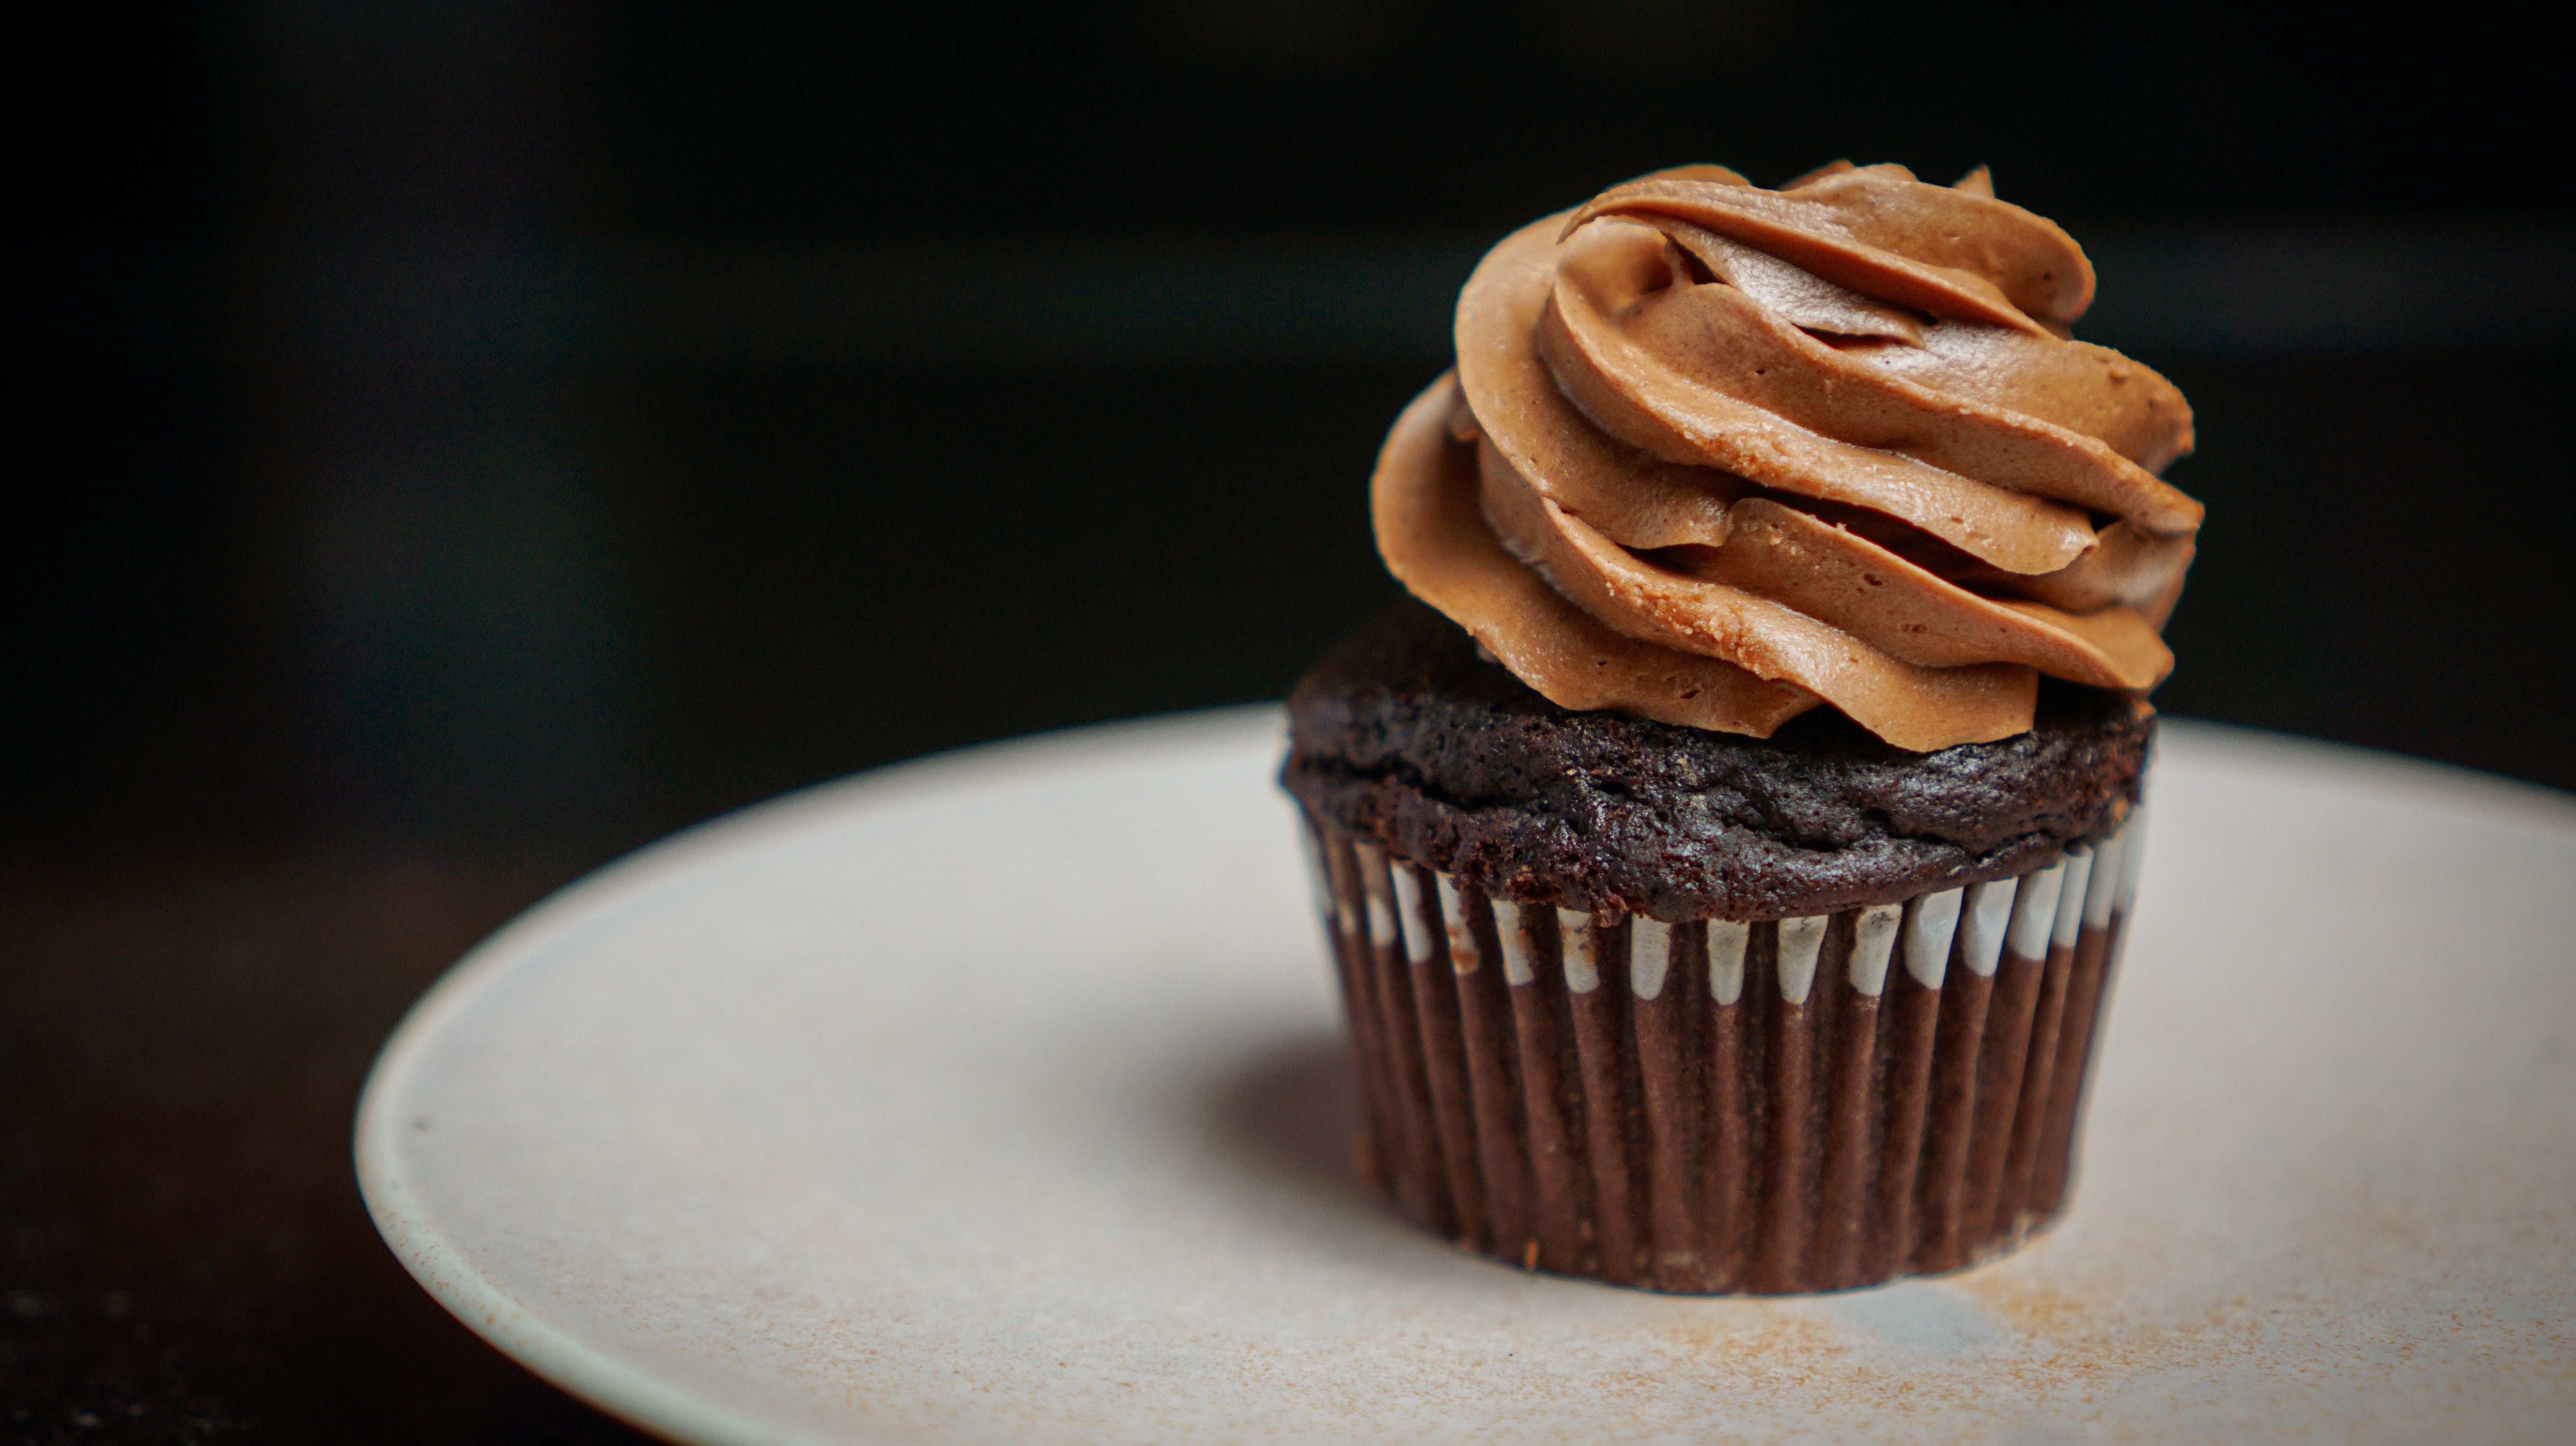 The Best Chocolate Frosting Is A Whipped Ganache